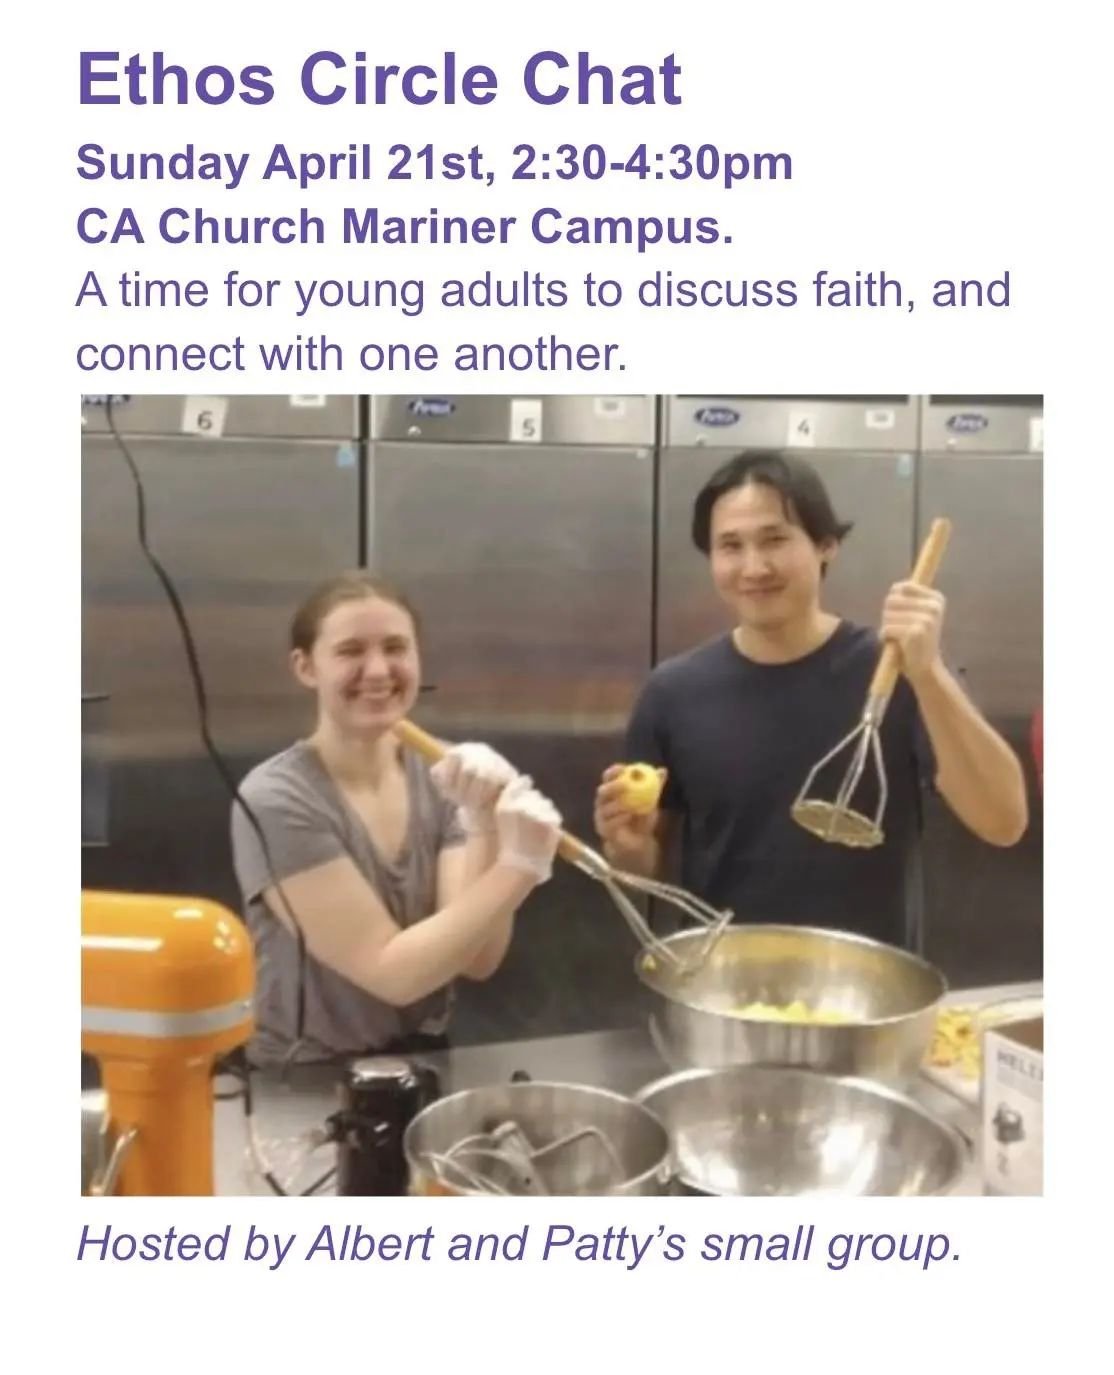 You are invited to an Ethos Circle Chat hosted by Albert and Patty's community group next Sunday April 21 from 2:30-4:30 in the upper room (same room as the Seder Meal). 

It's a great opportunity to get to meet other people in the Ethos Community an